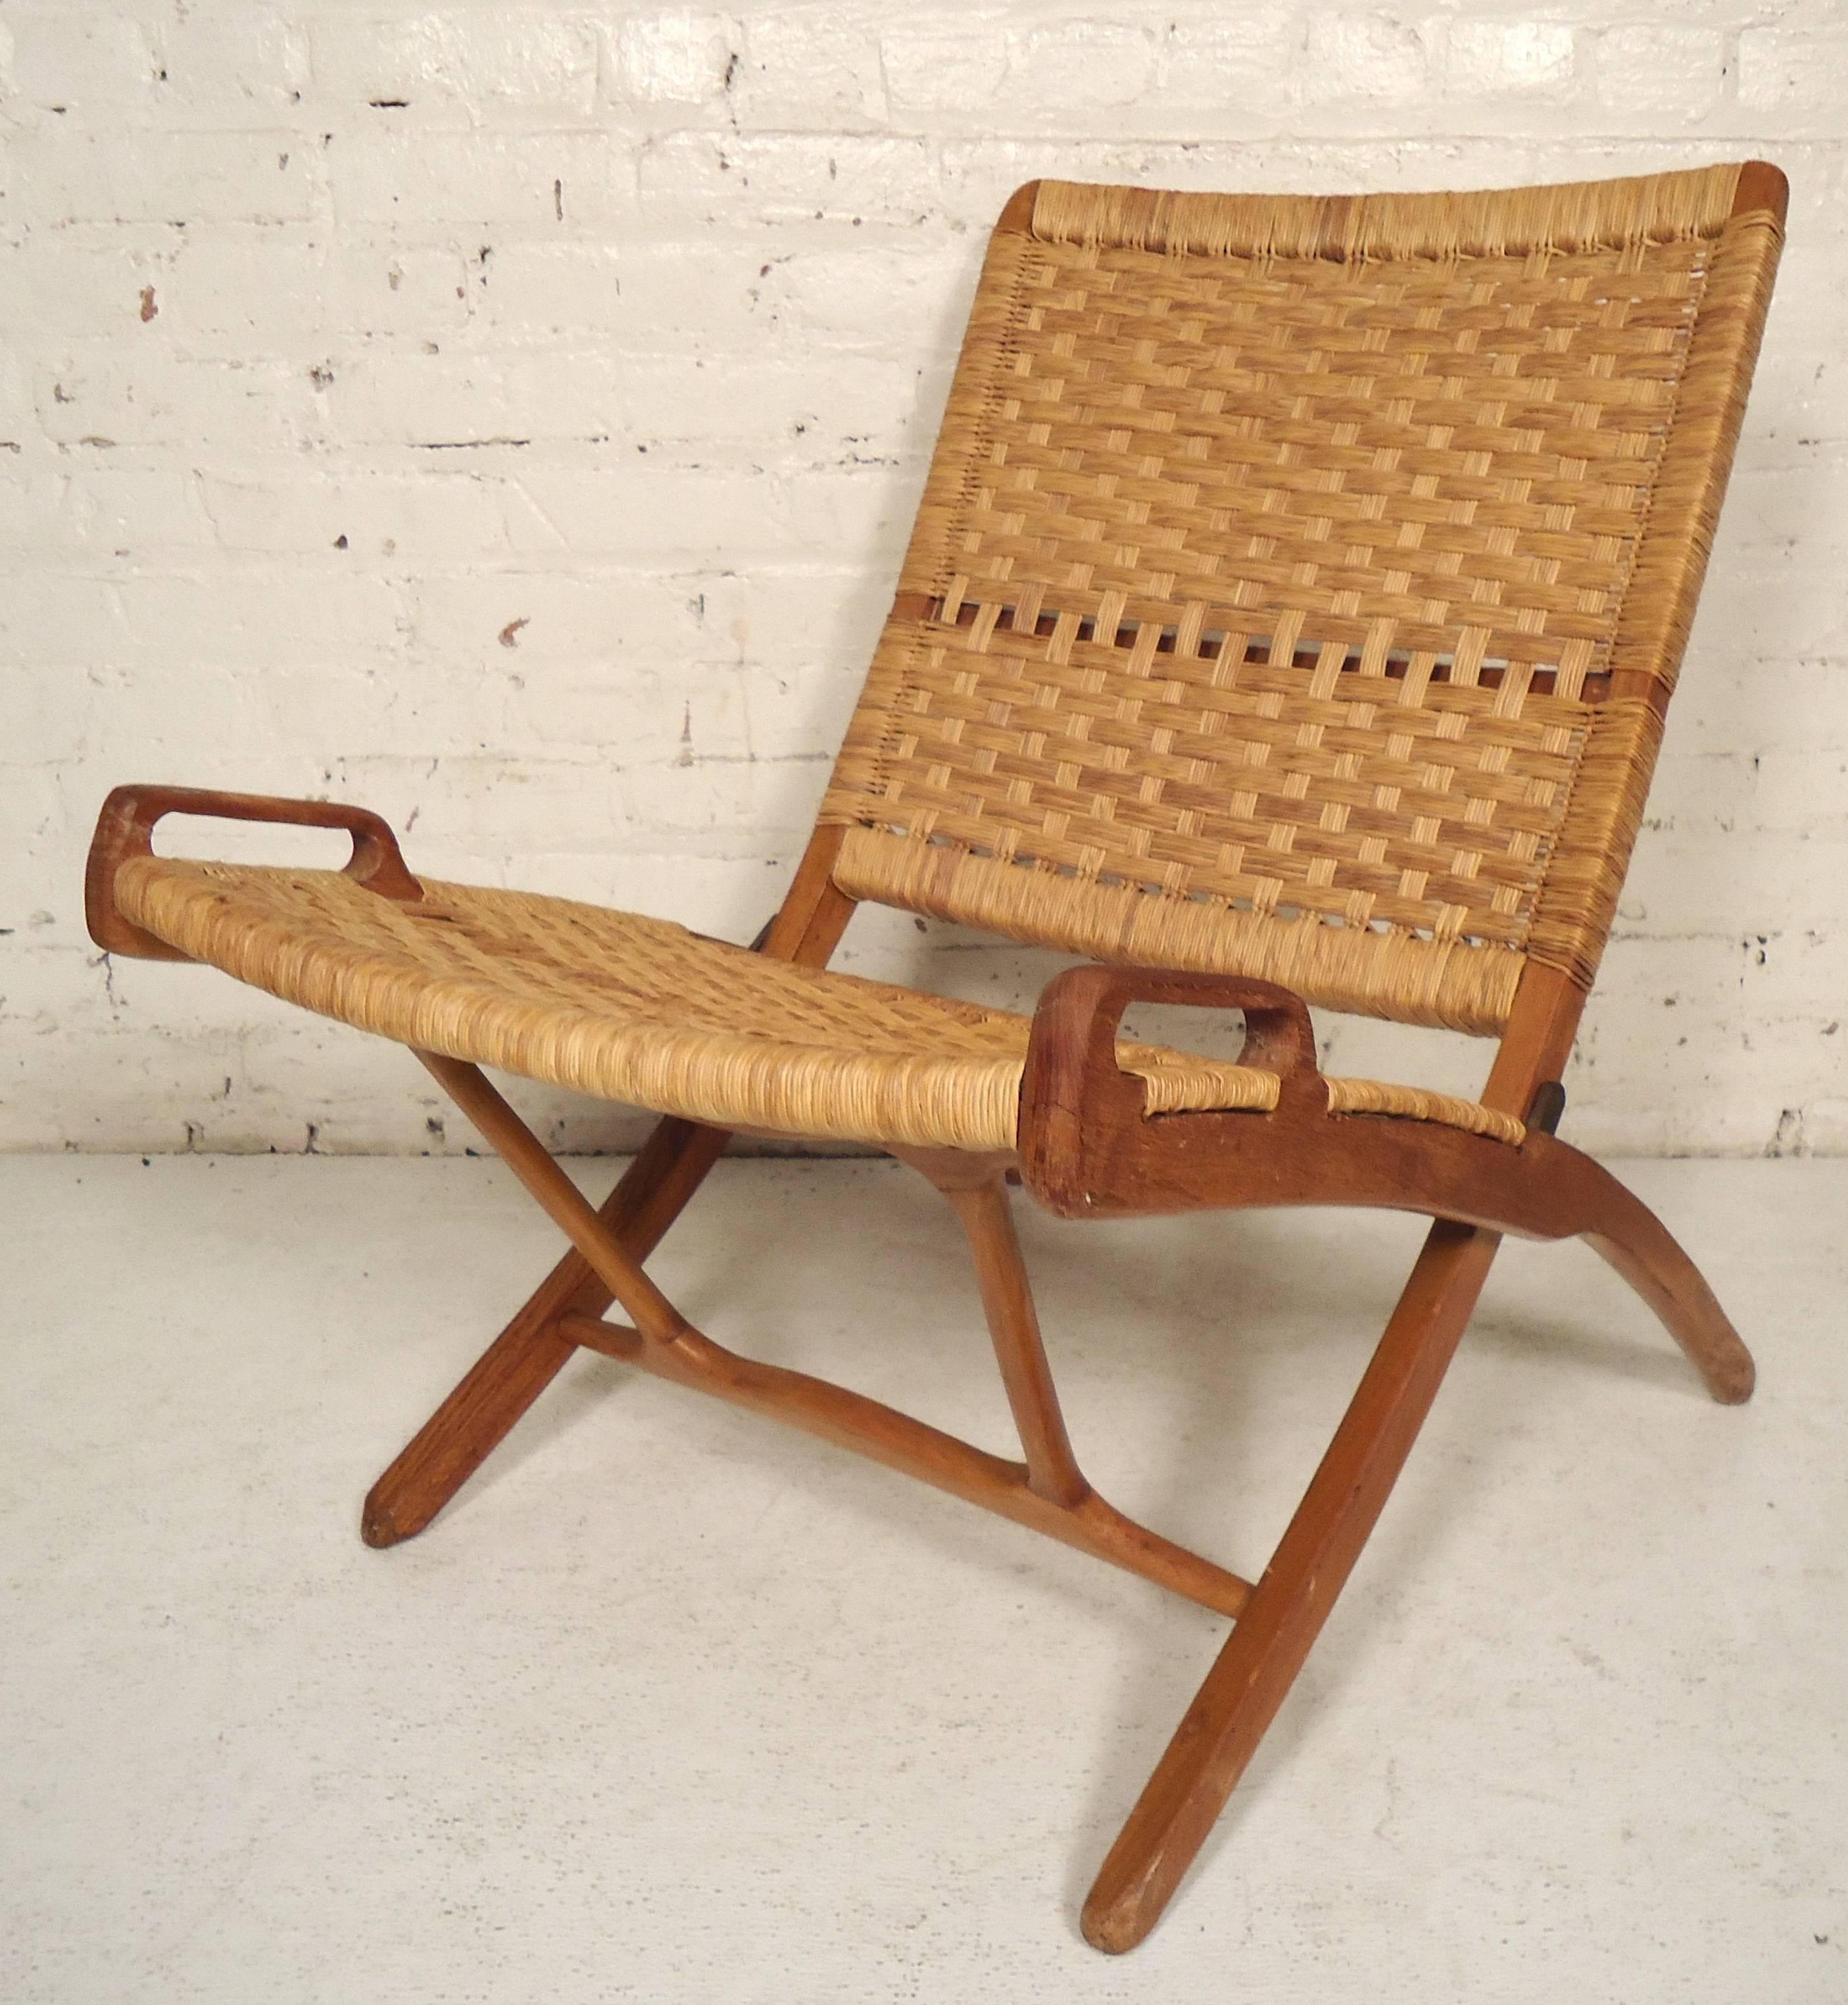 Beautiful Mid-Century Modern low chair with woven seat and back. Great for indoor or outdoor use.

(Please confirm item location - NY or NJ - with dealer).
 